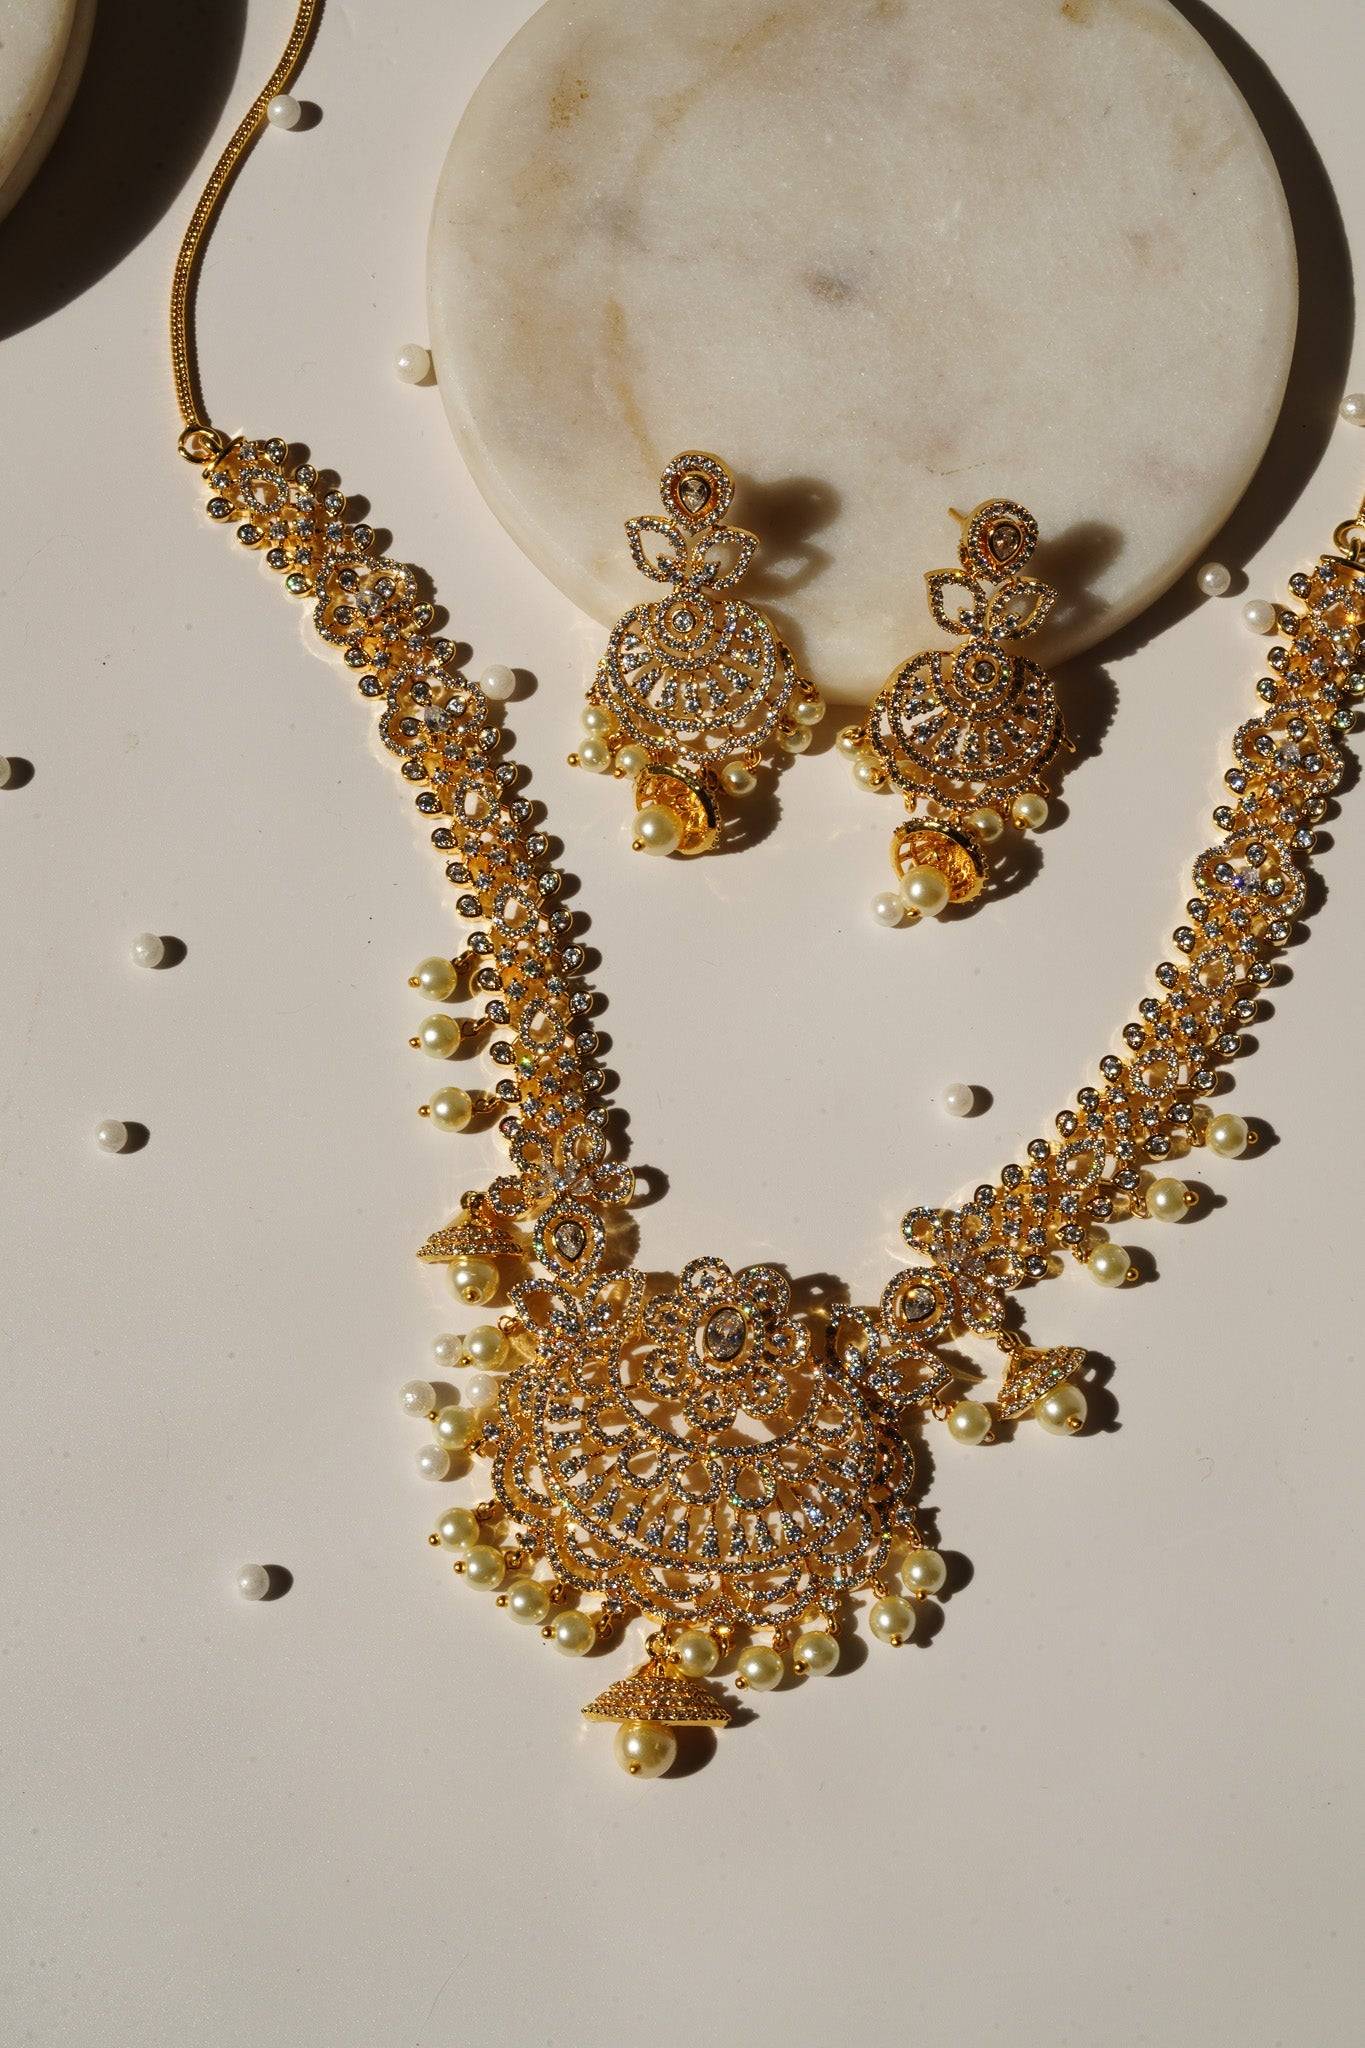 Anika Gold AD Necklace Set - Featuring intricate paisley and floral designs, hanging pearls, and matching dangler earrings.